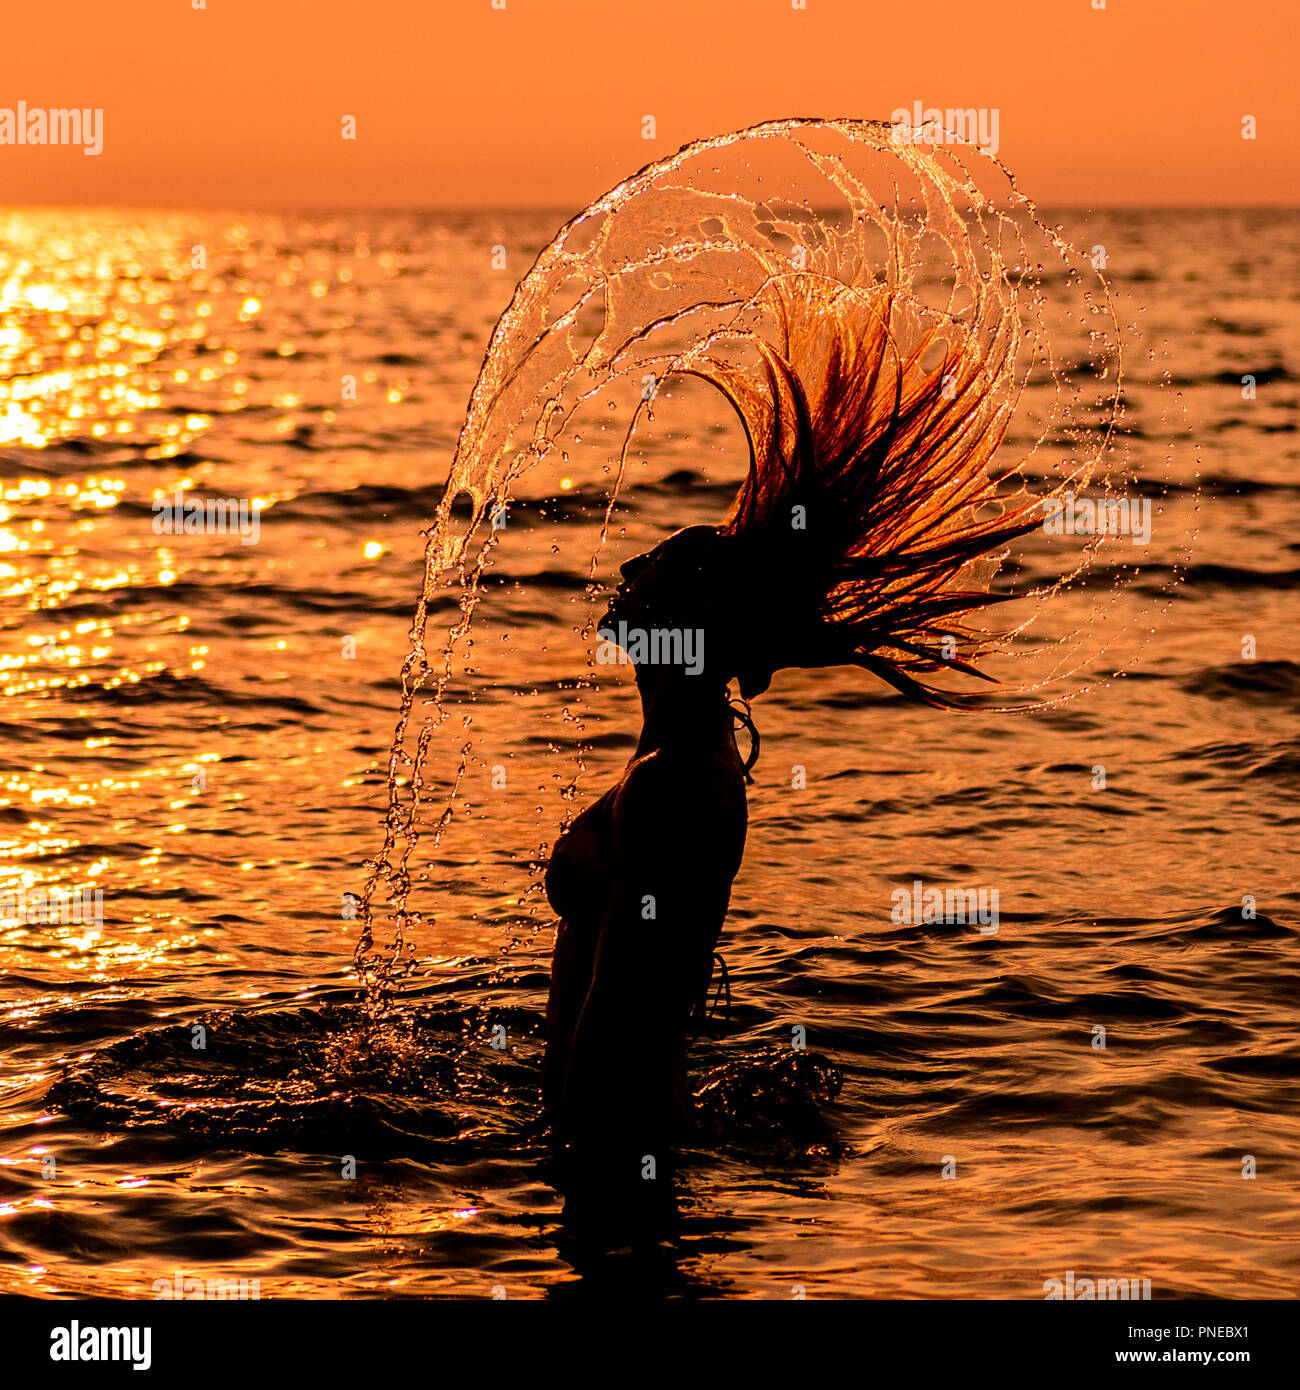 Teen Girl In A Dress With Long Hair At The Beach In Silhouette During Sunset Flipping Her Hair In The Water Stock Photo